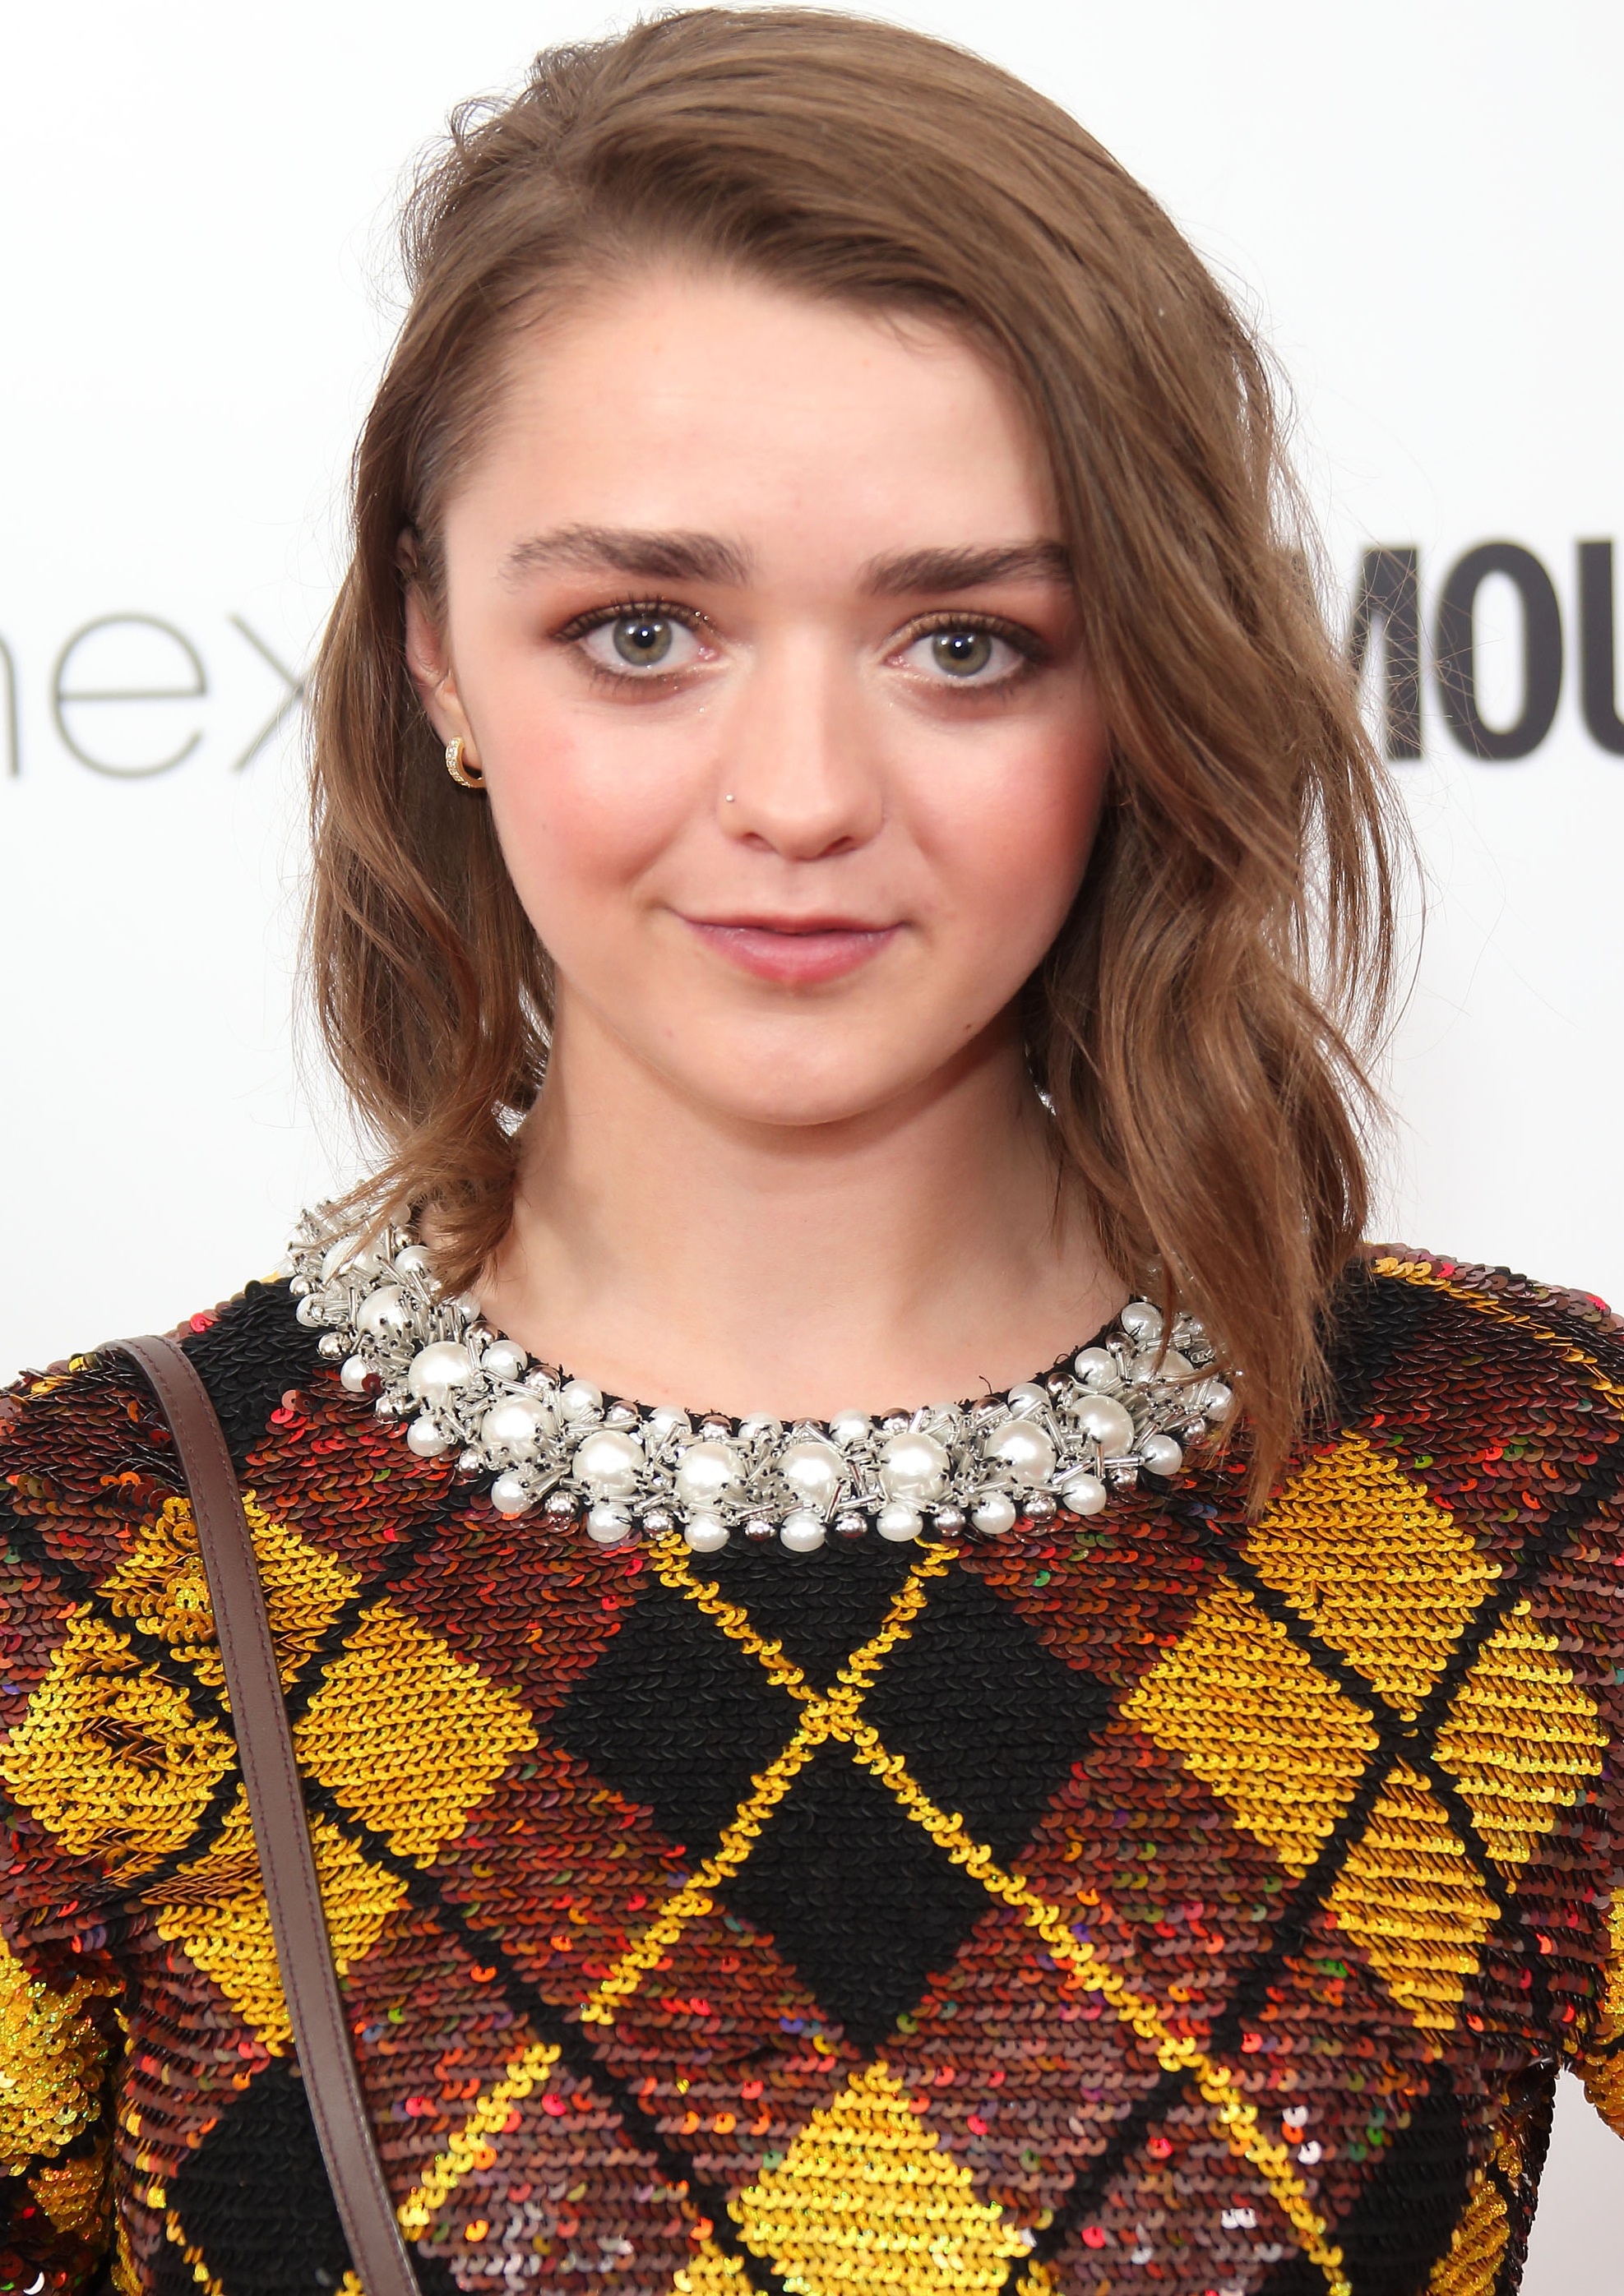 Maisie Williams Wallpapers (54+ images inside)